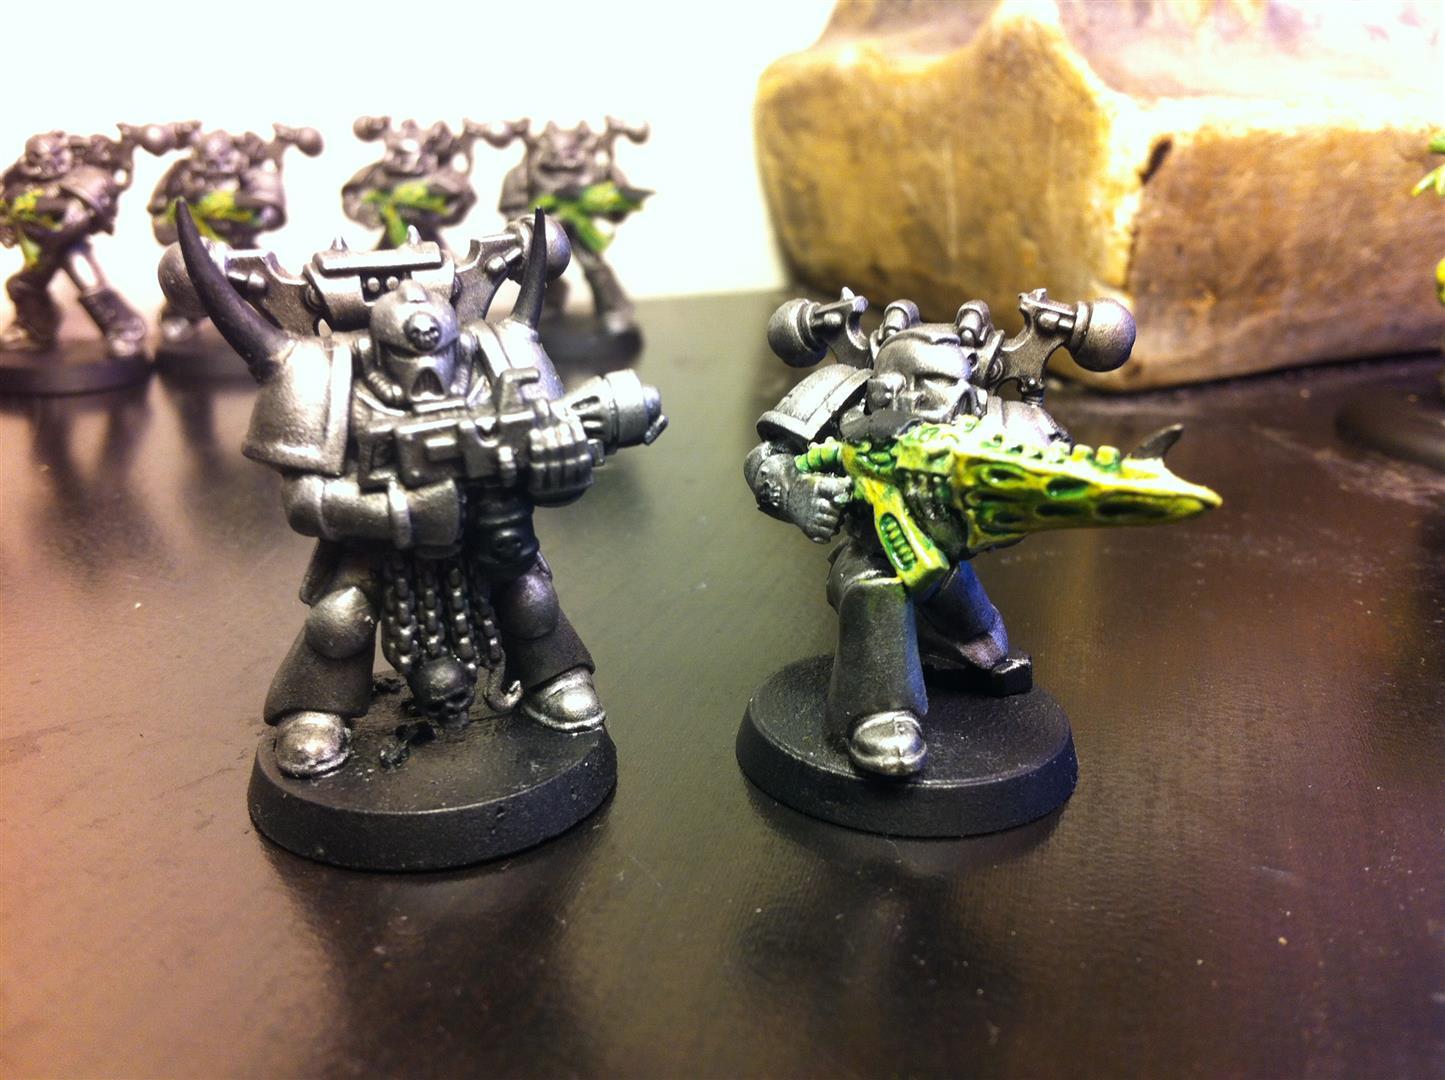 Heavy weapons. Biolauncher & an OLD Space Marine w/flamer conversion